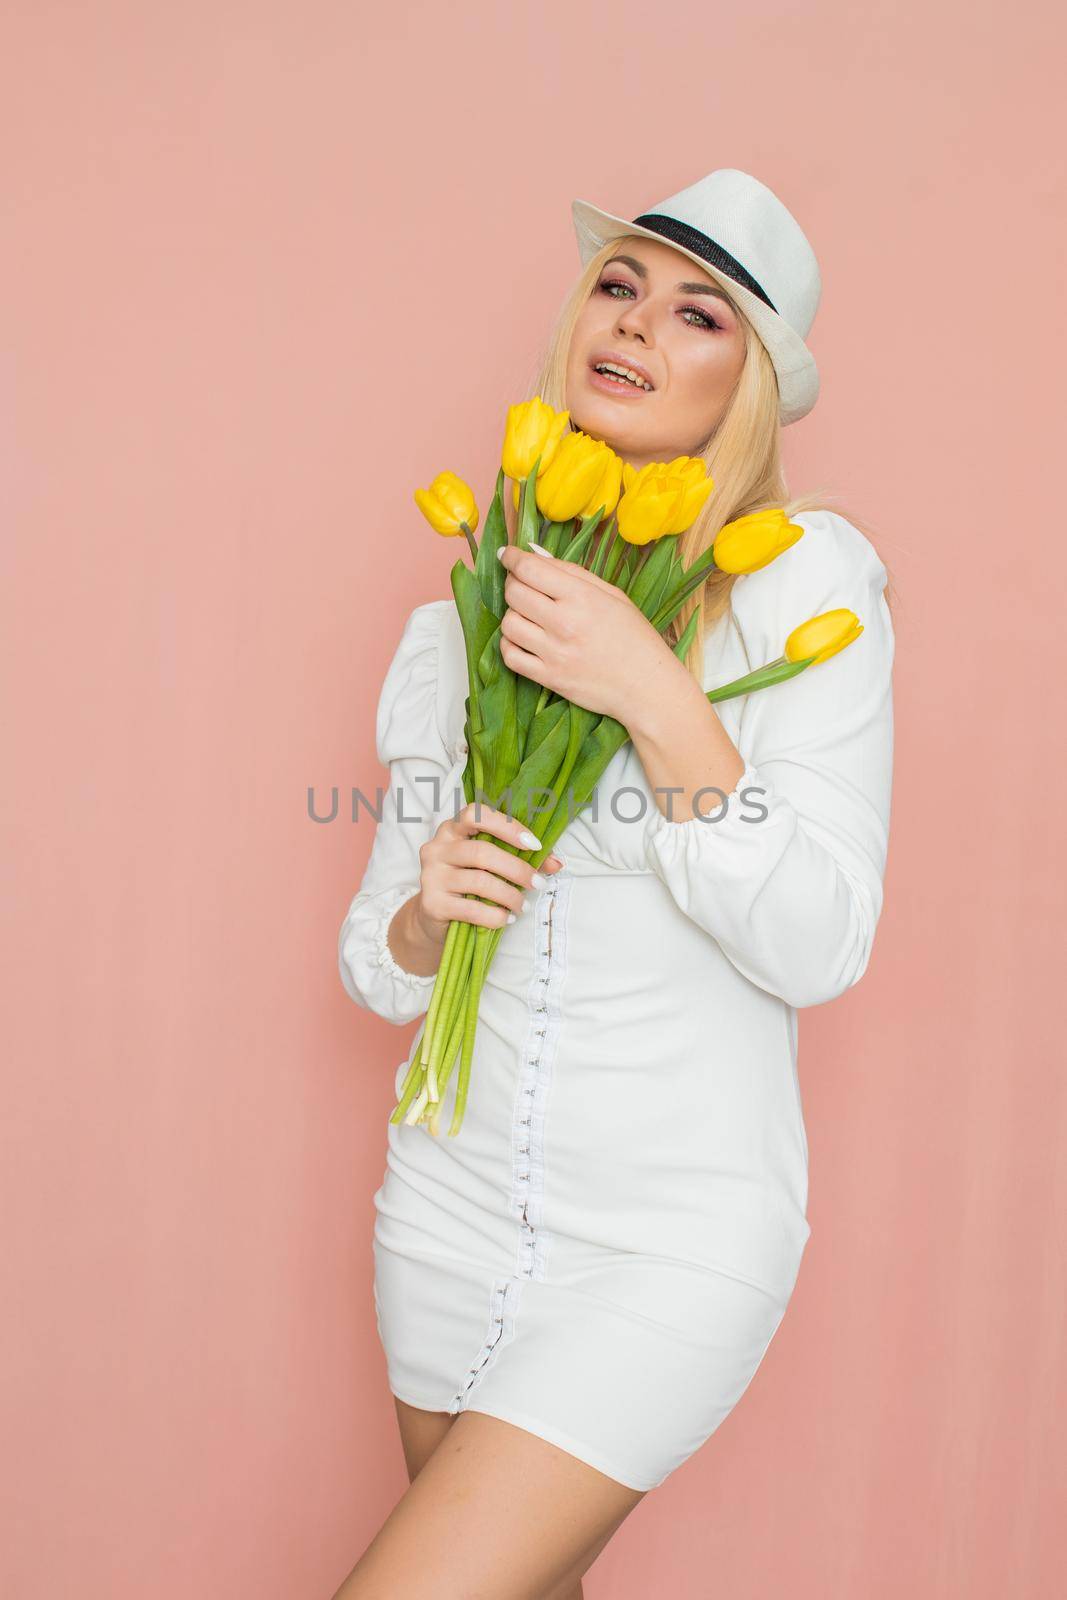 Spring fashion photo of blonde woman posing over pink background. Wearing white vintage dress with long sleeves and white hat. Holding bouquet with yellow tulips in her hands